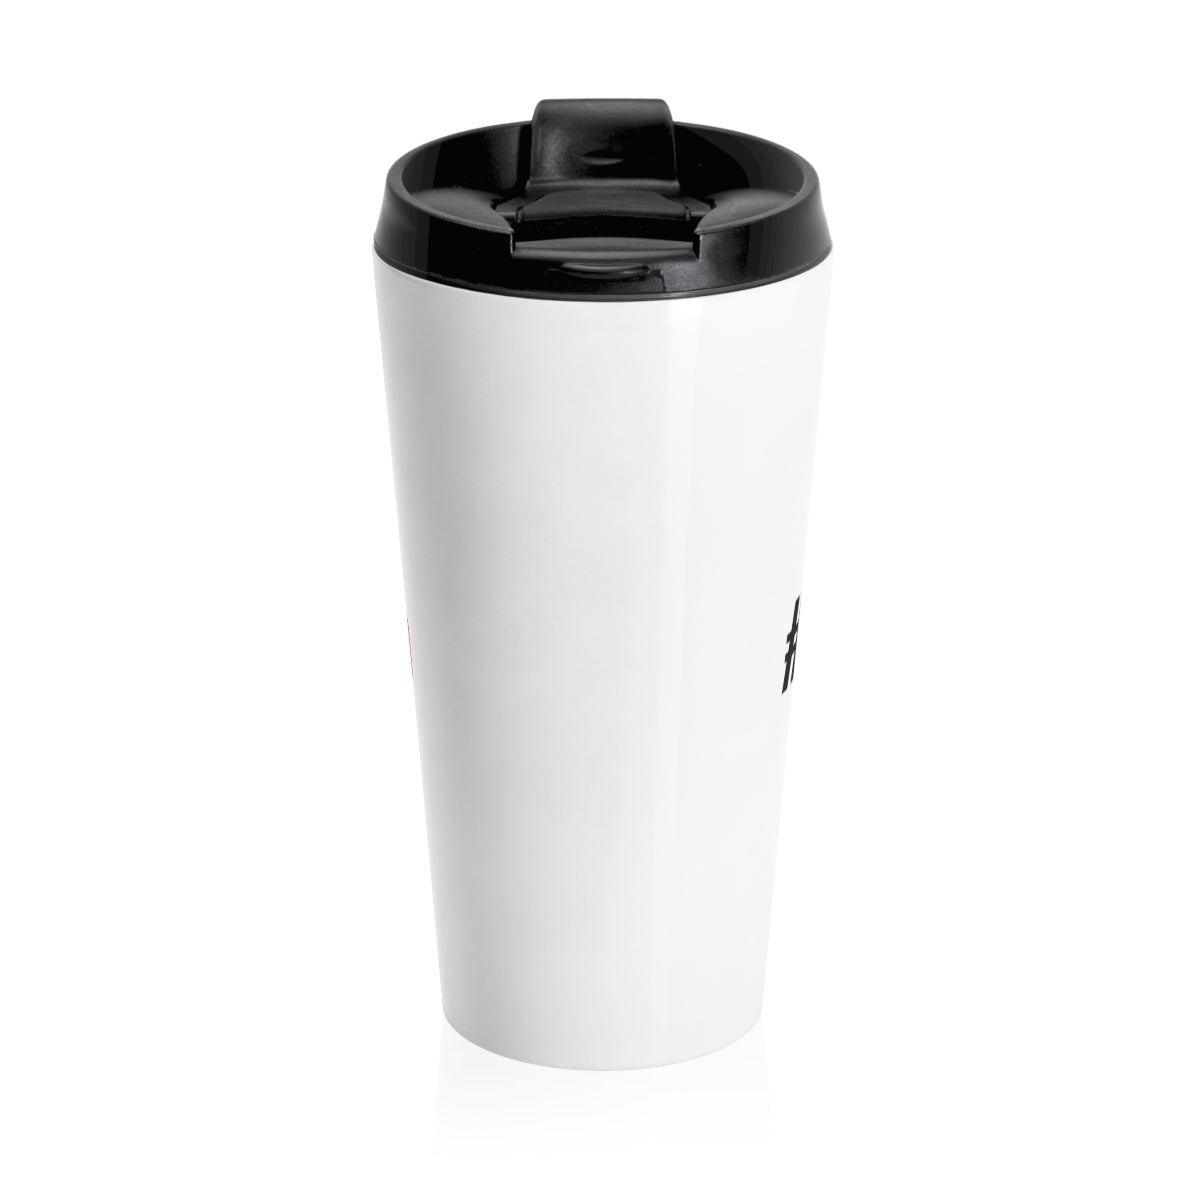 Five Toes Down # Stainless Steel Travel Mug